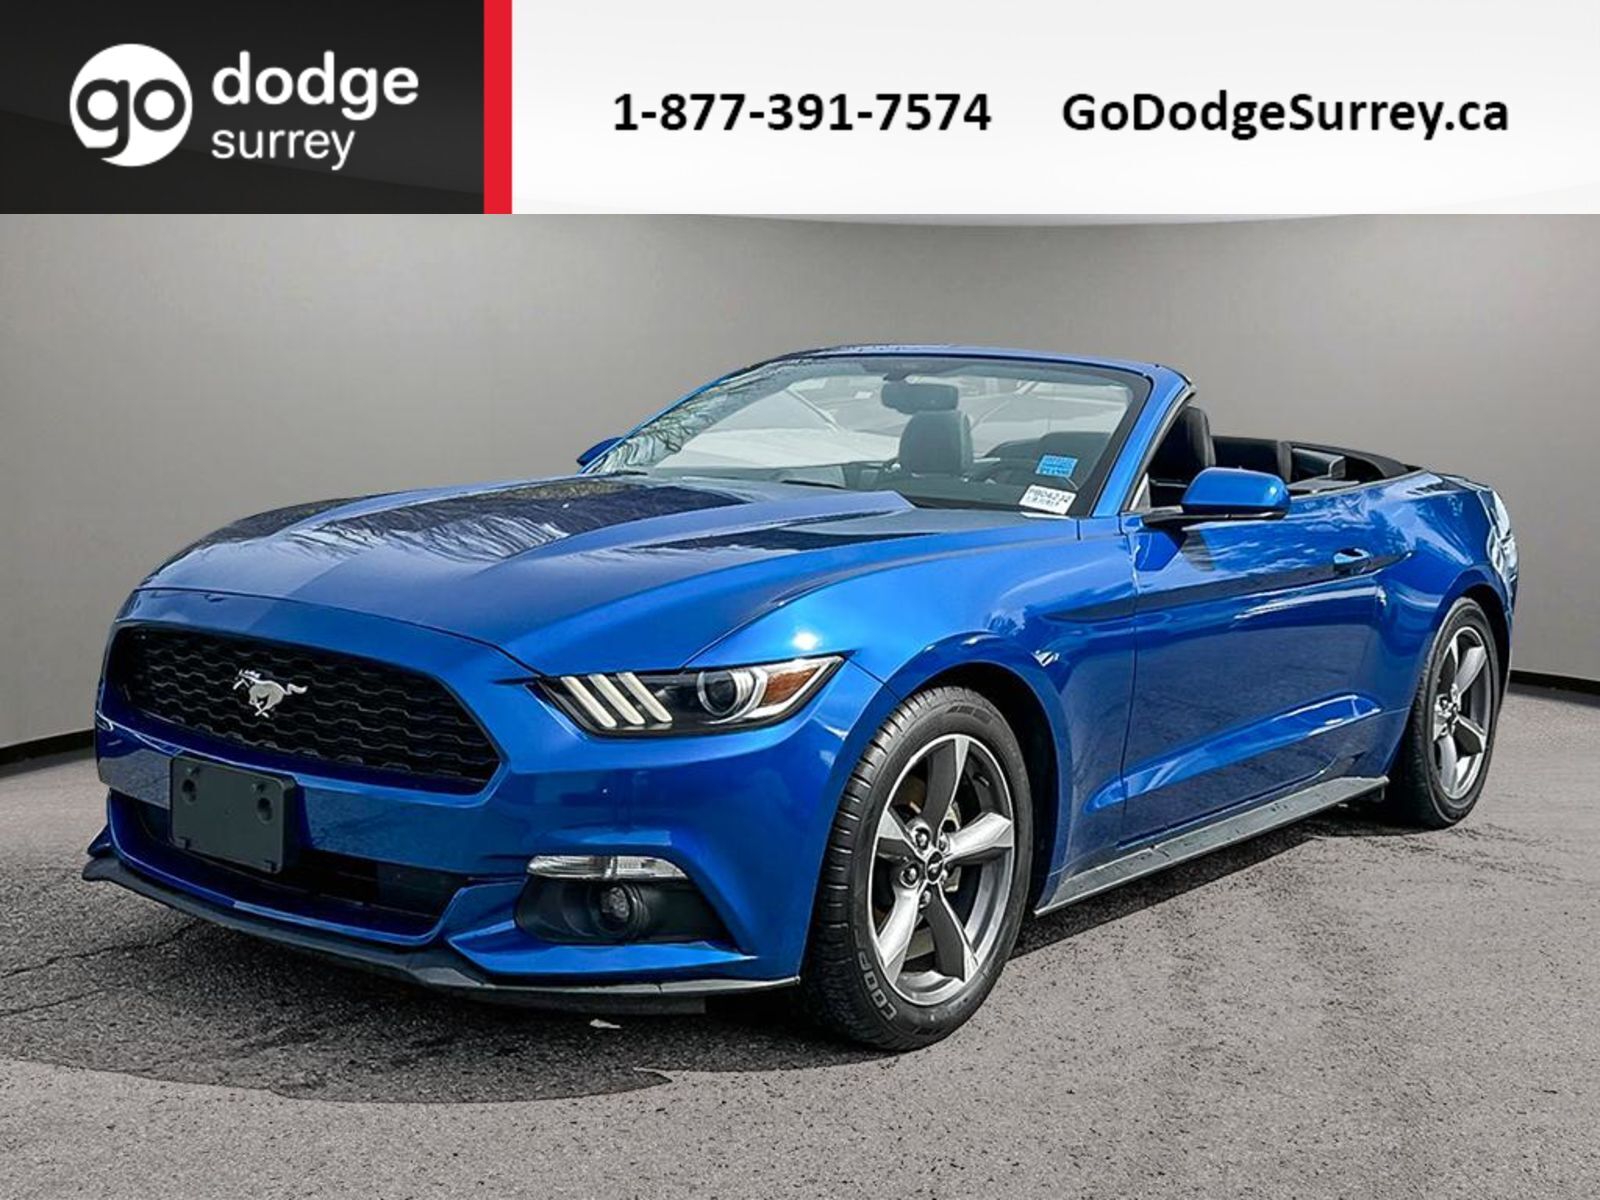 2017 Ford Mustang V6 + CONVERTIBLE/RWD/REAR VIEW CAM/NO EXTRA FEES